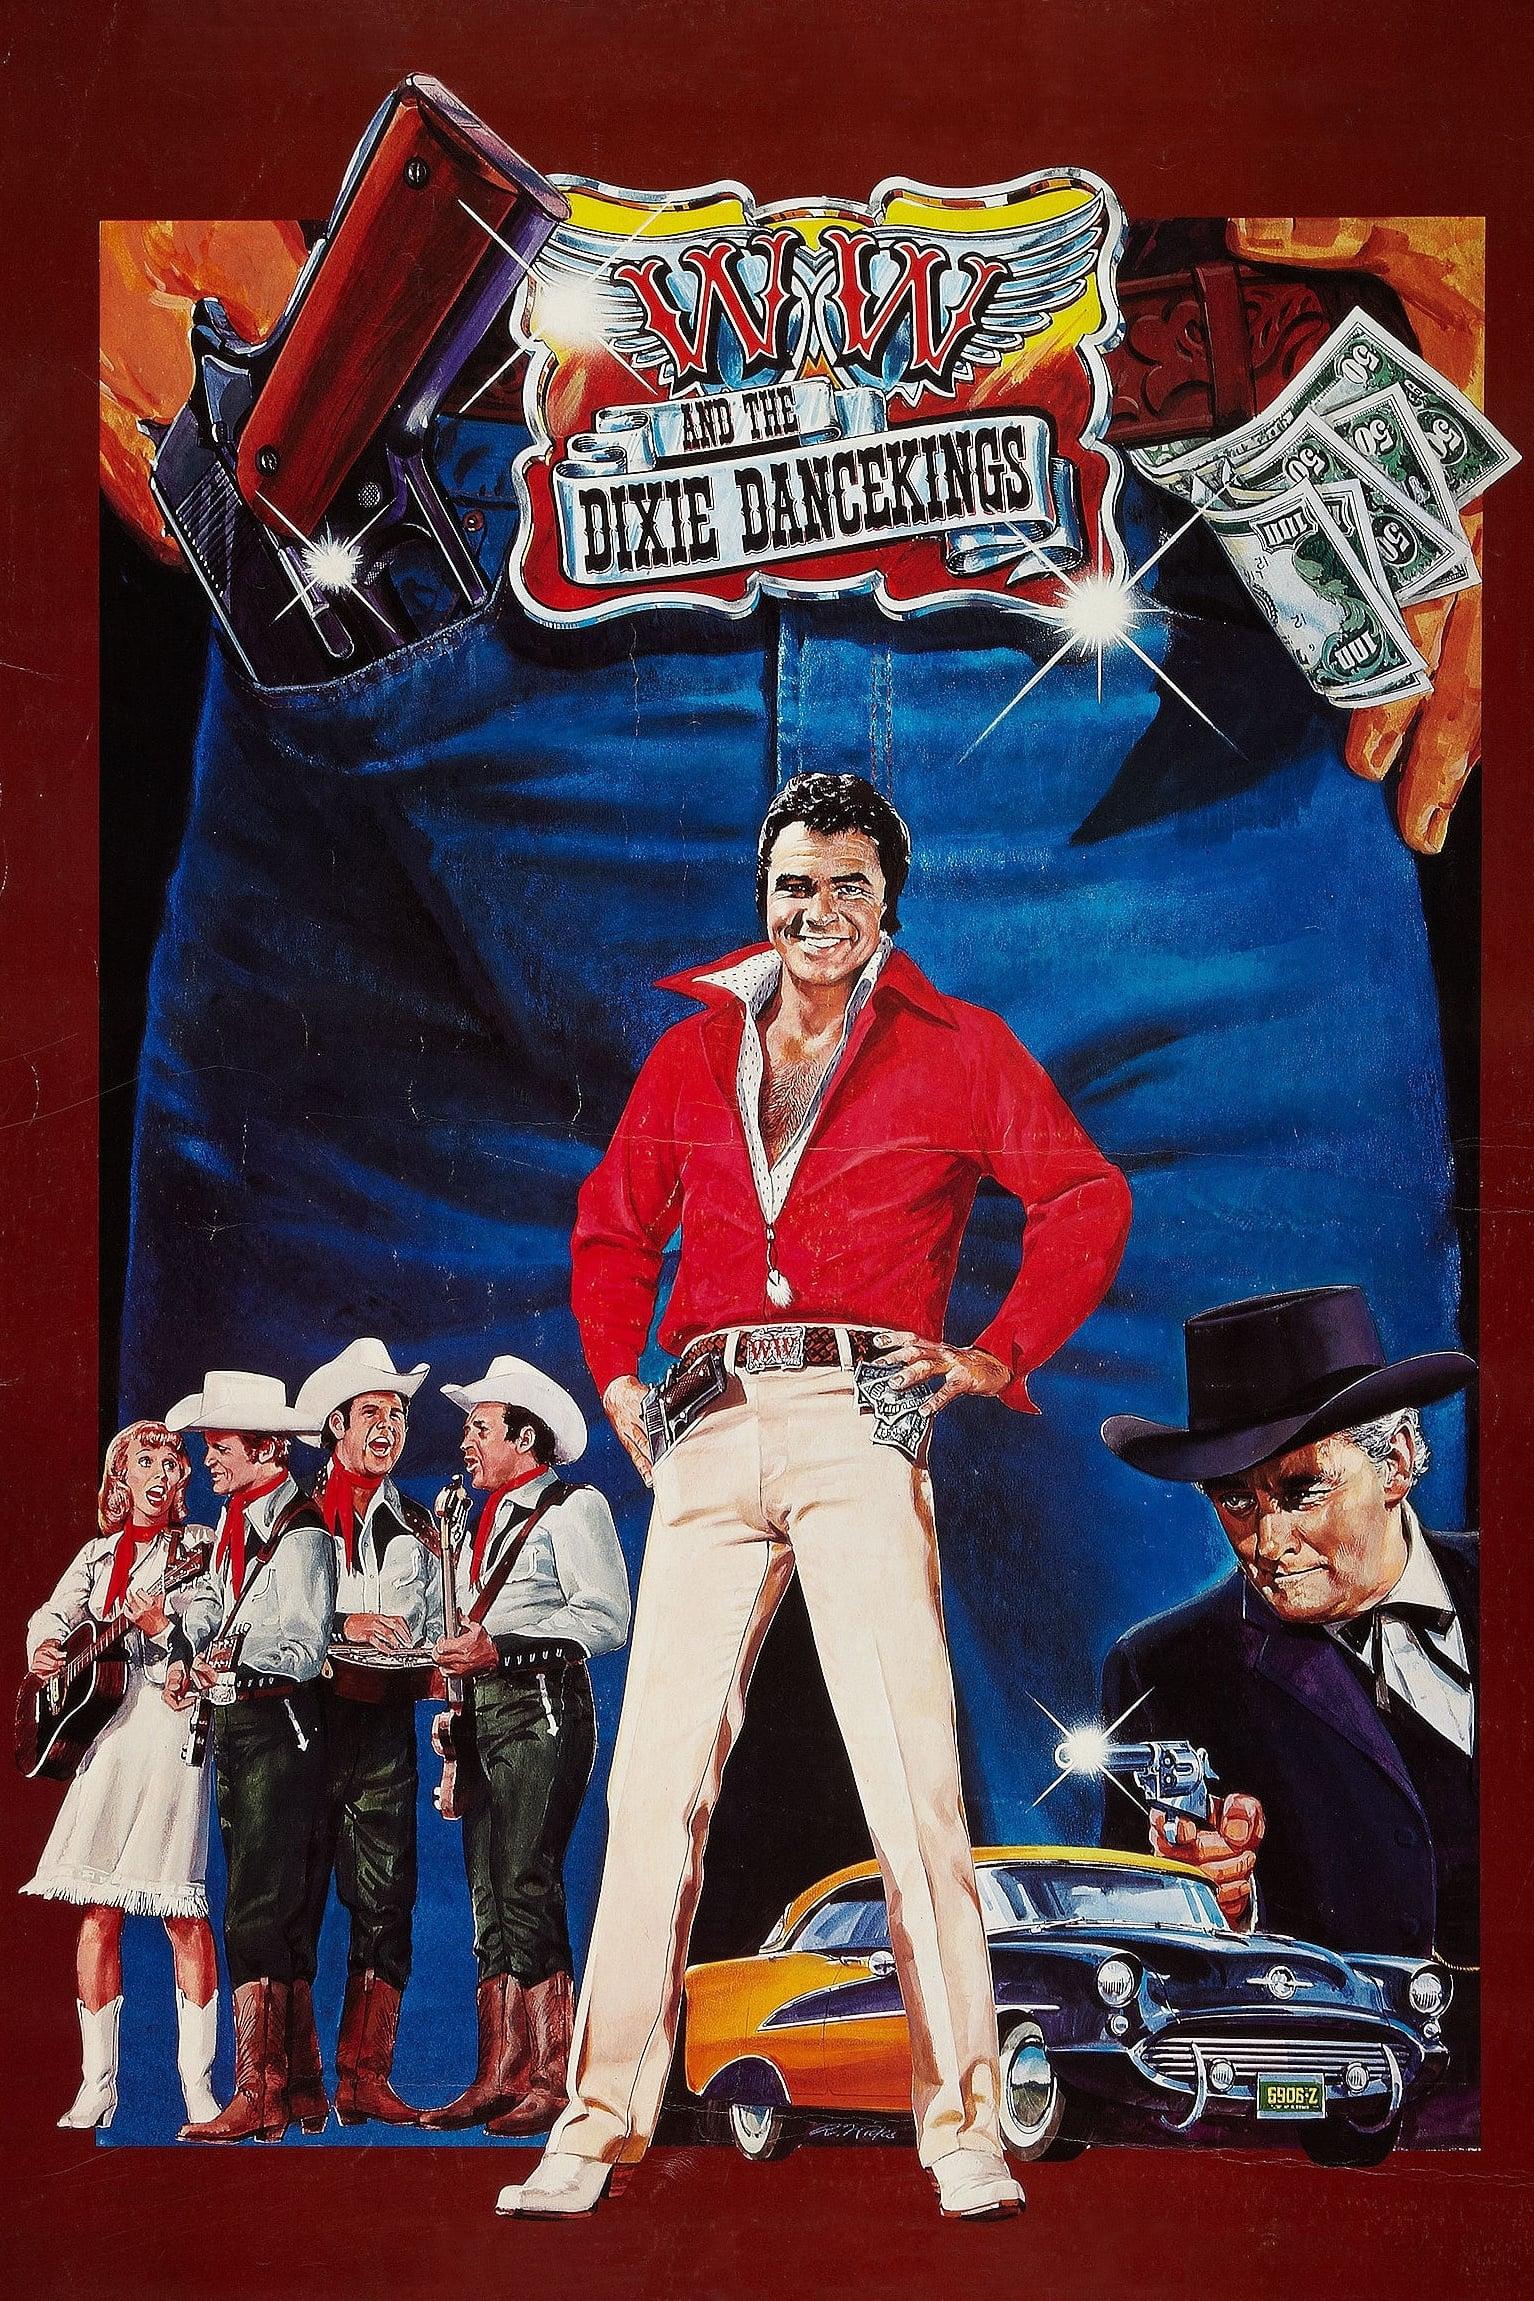 W.W. and the Dixie Dancekings poster